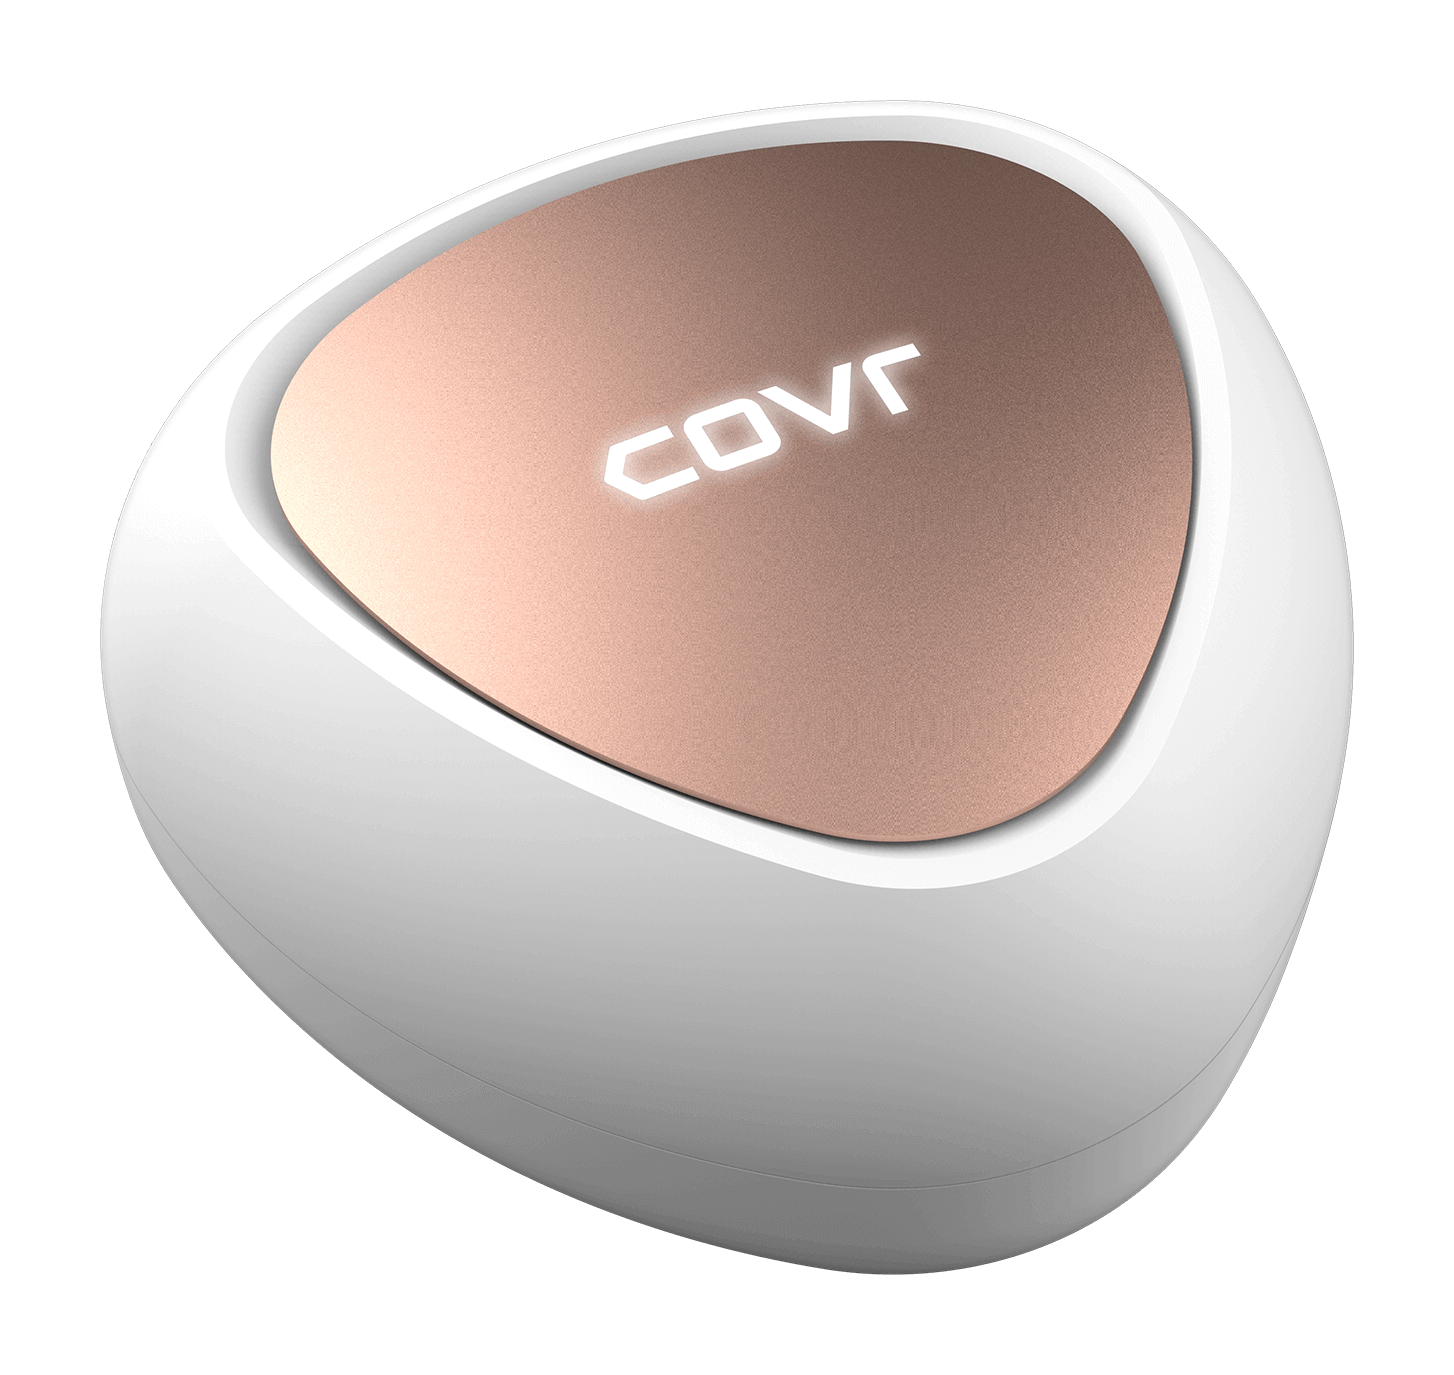 COVR-C1200 right side image